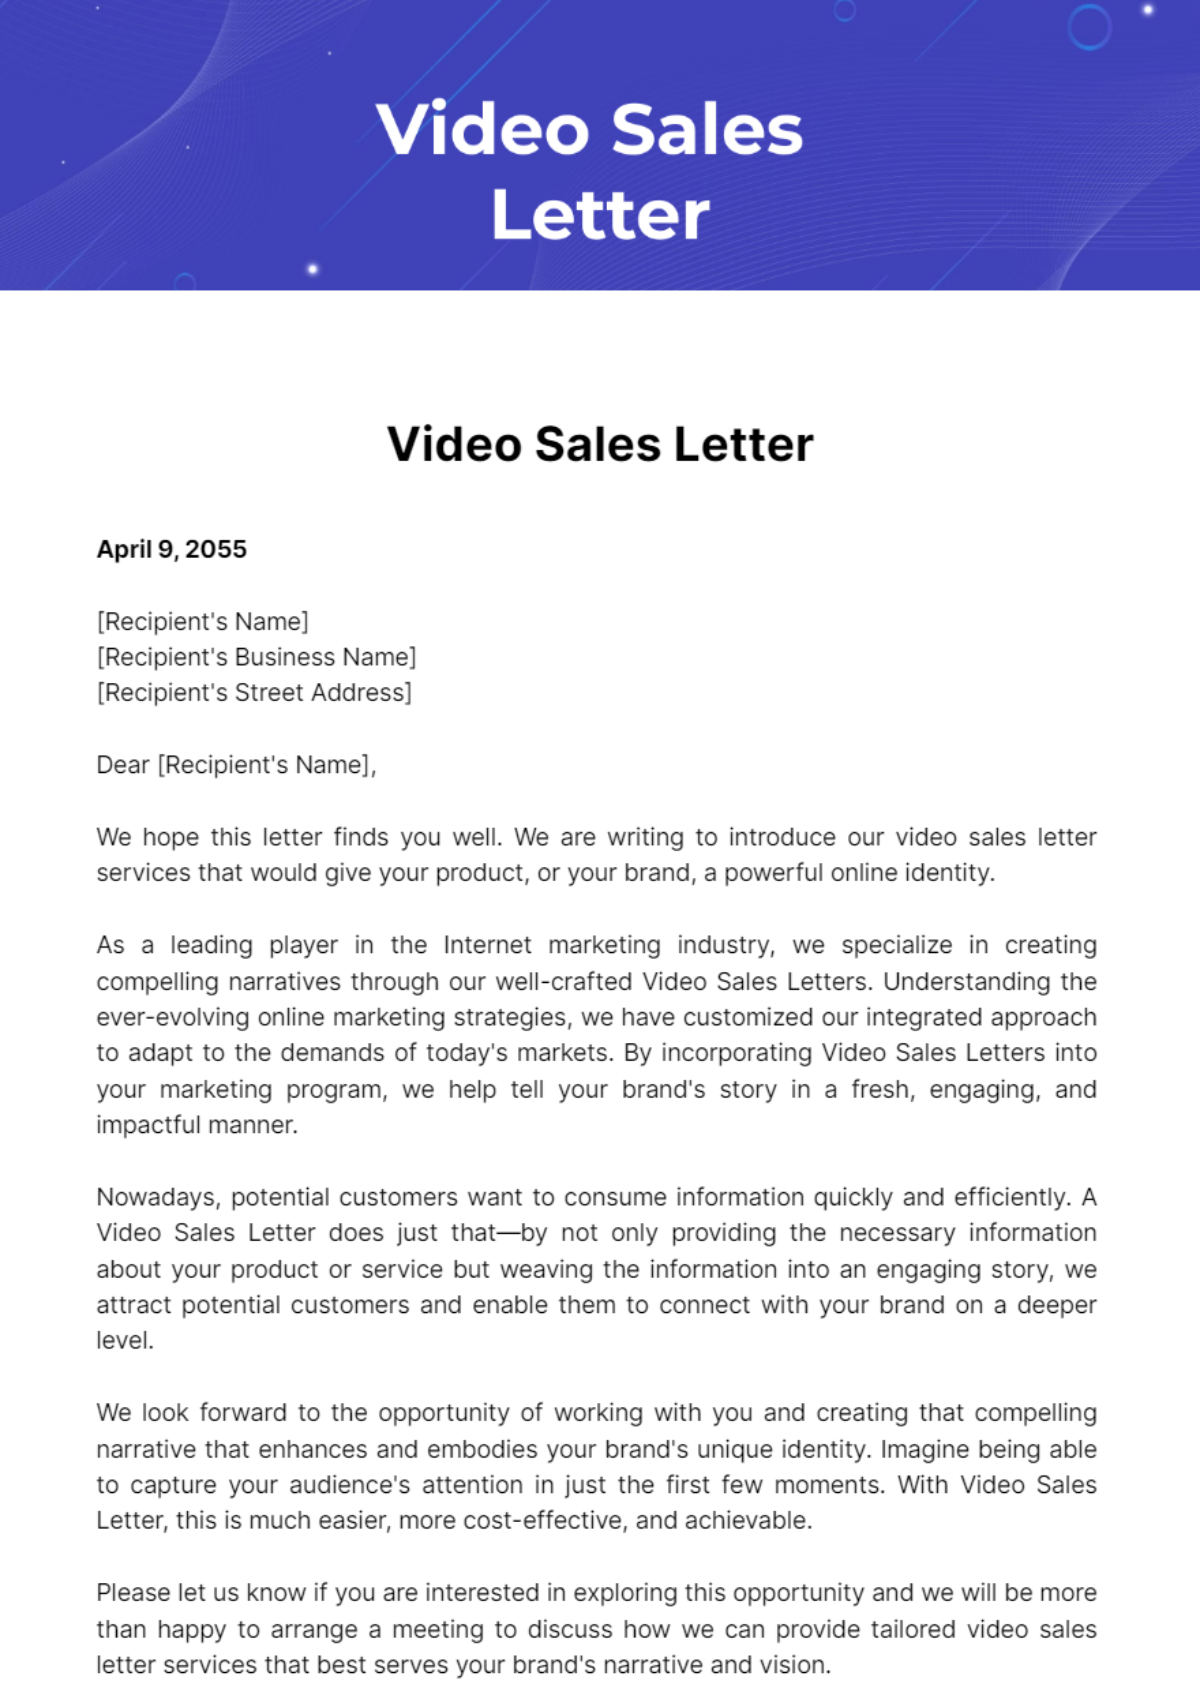 Free Video Sales Letter Template